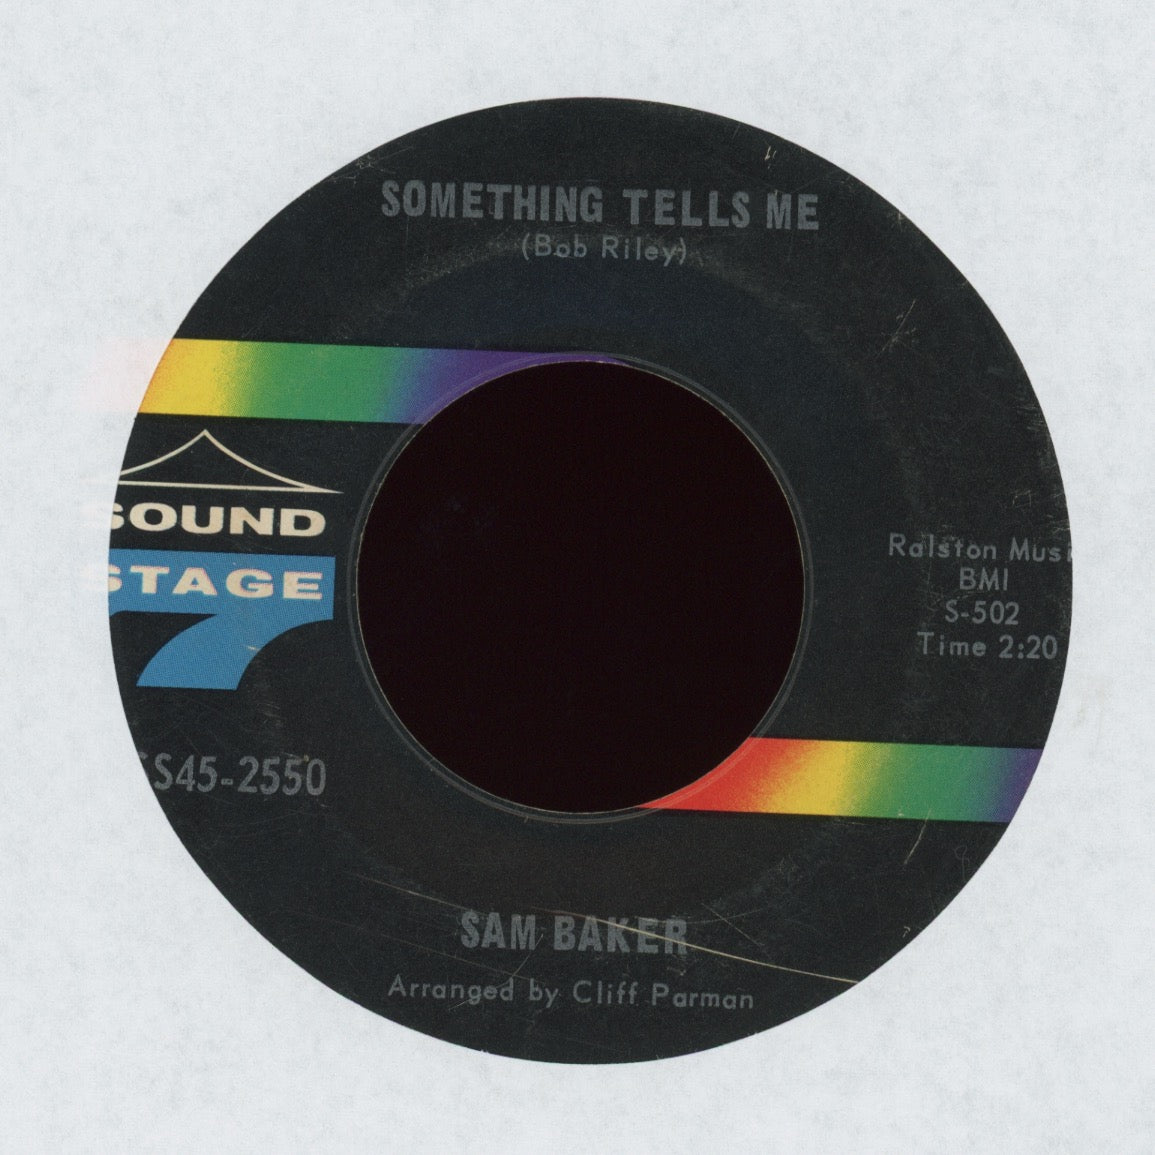 Sam Baker - Sometimes You Have To Cry on Sound Stage 7